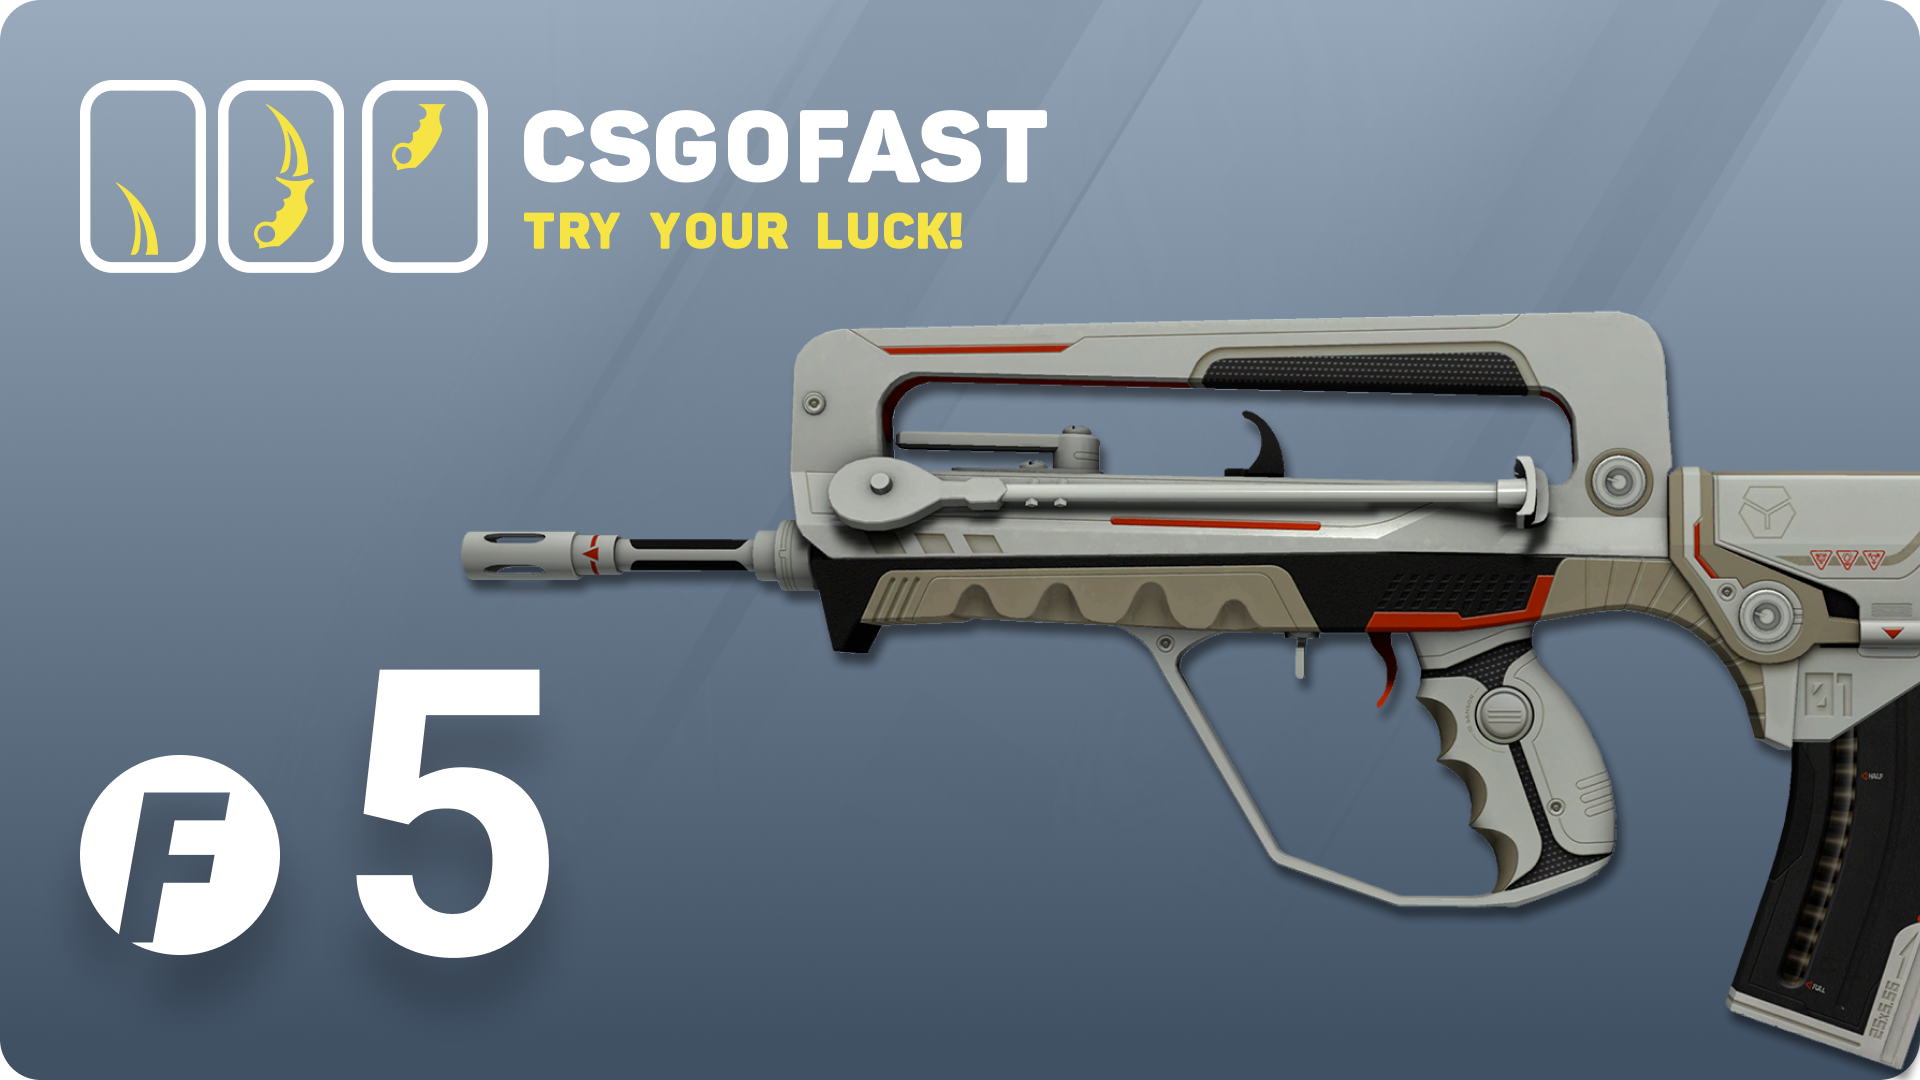 CSGOFAST 5 Fast Coins Gift Card 3.63 $